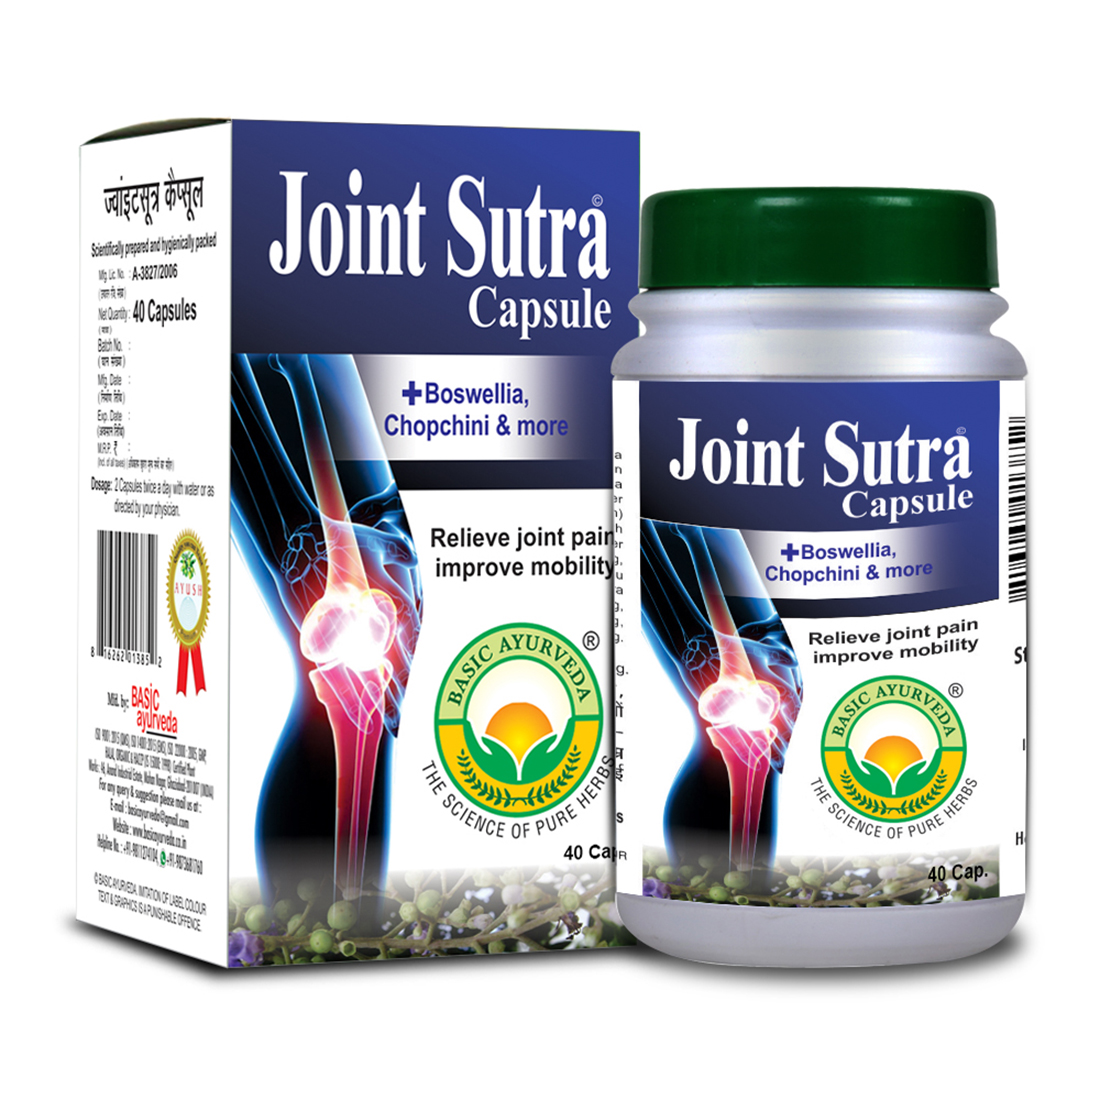 Joint Sutra Capsule